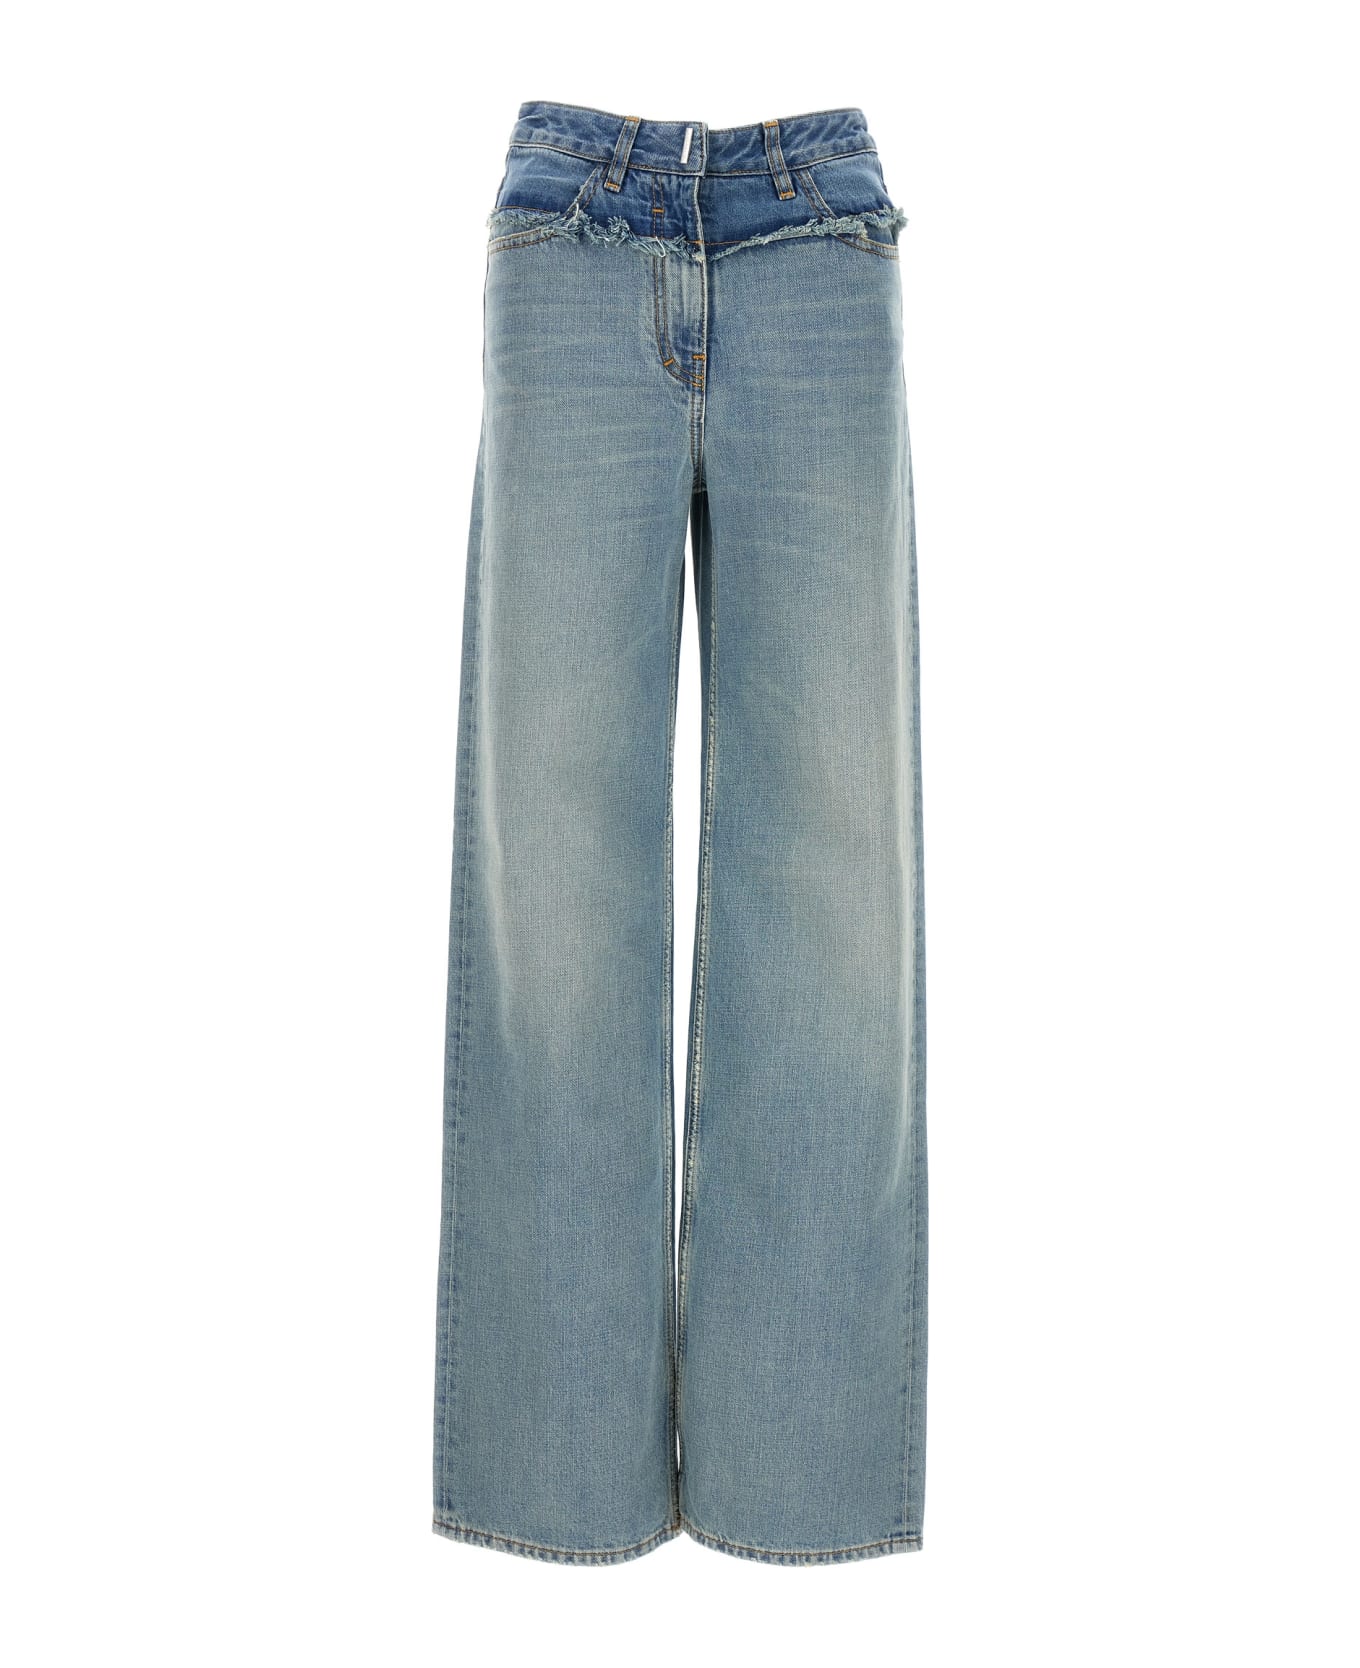 Givenchy Baggy Jeans - Light Blue